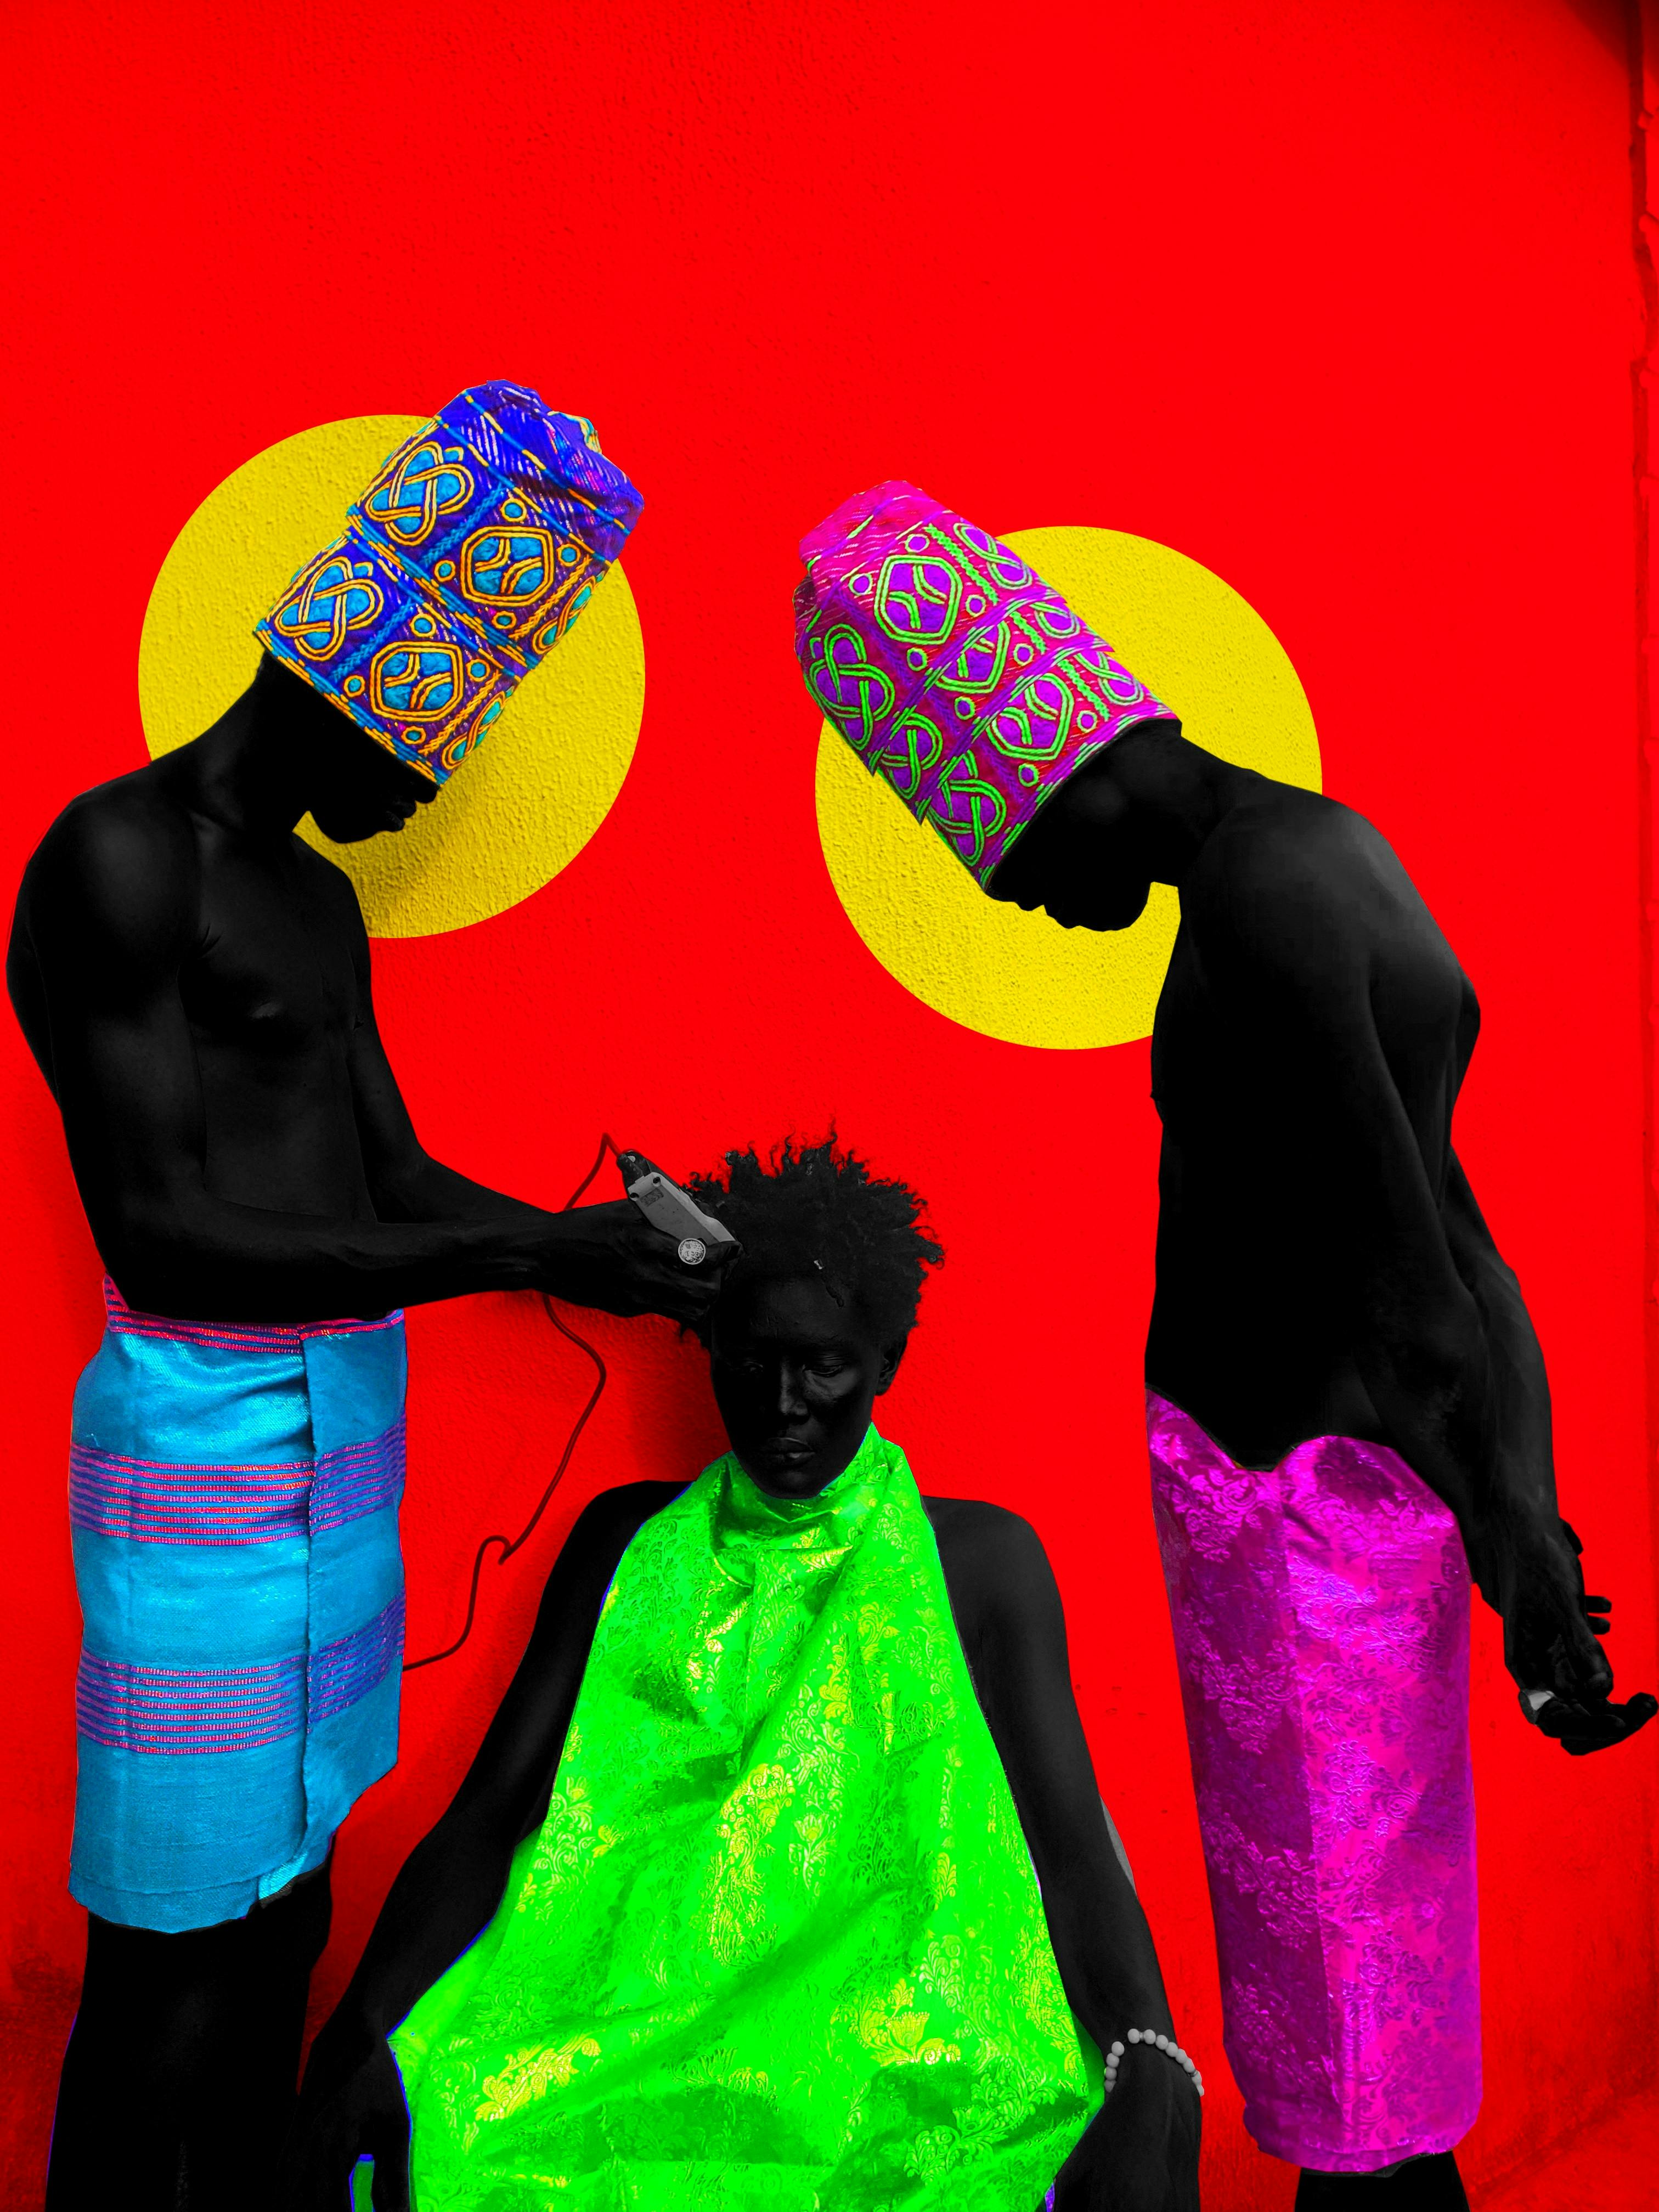 The influence of the Yoruba Cultural Headpieces on his art - Sanjo Lawal